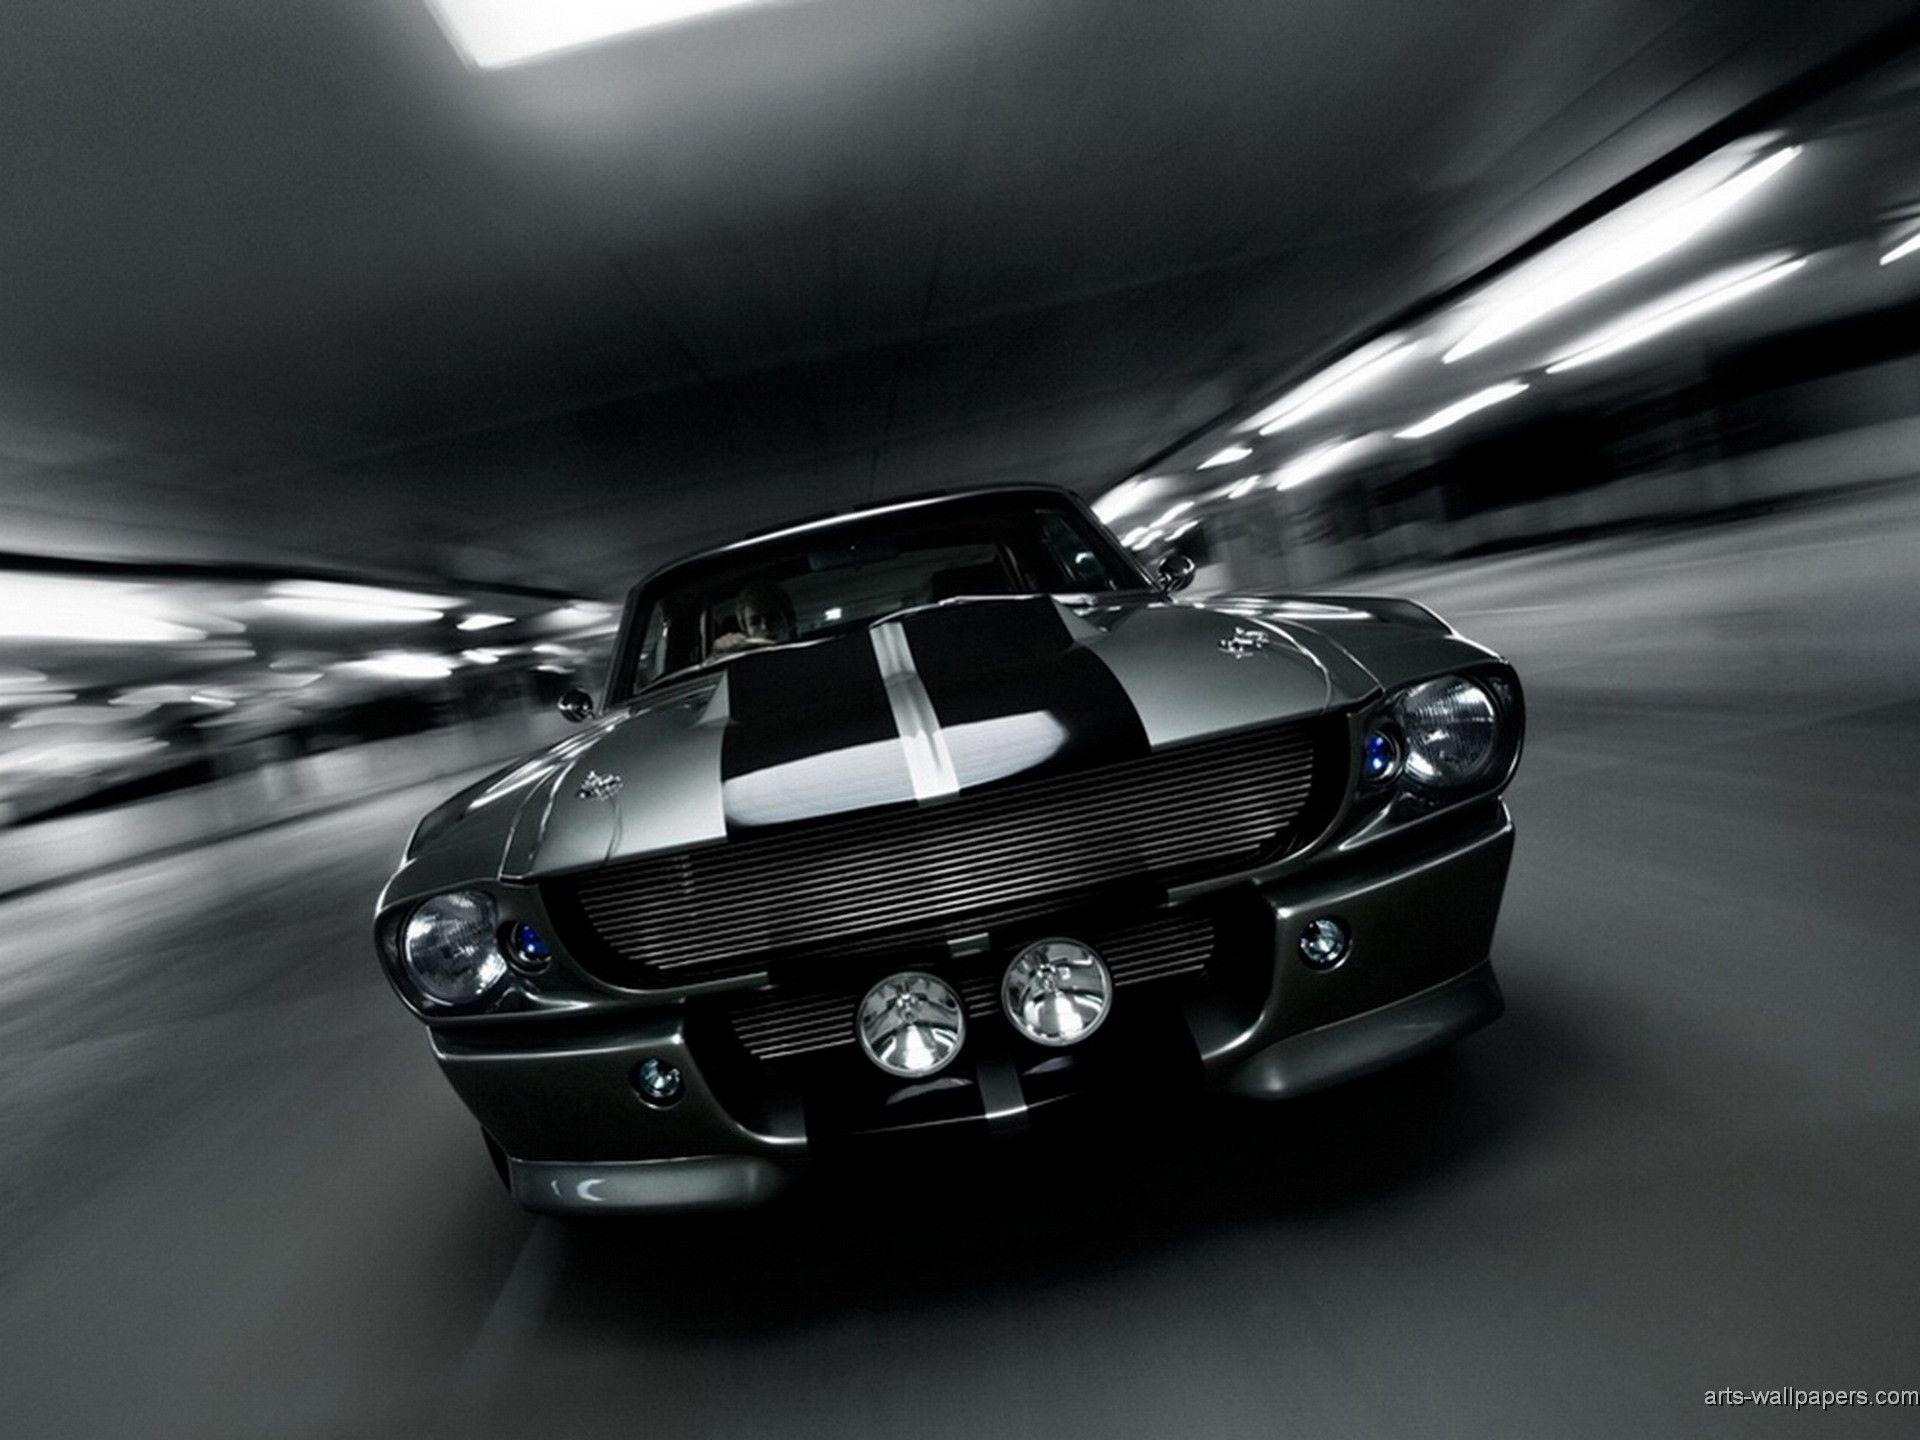 Pix For > 67 Shelby Gt500 Wallpaper